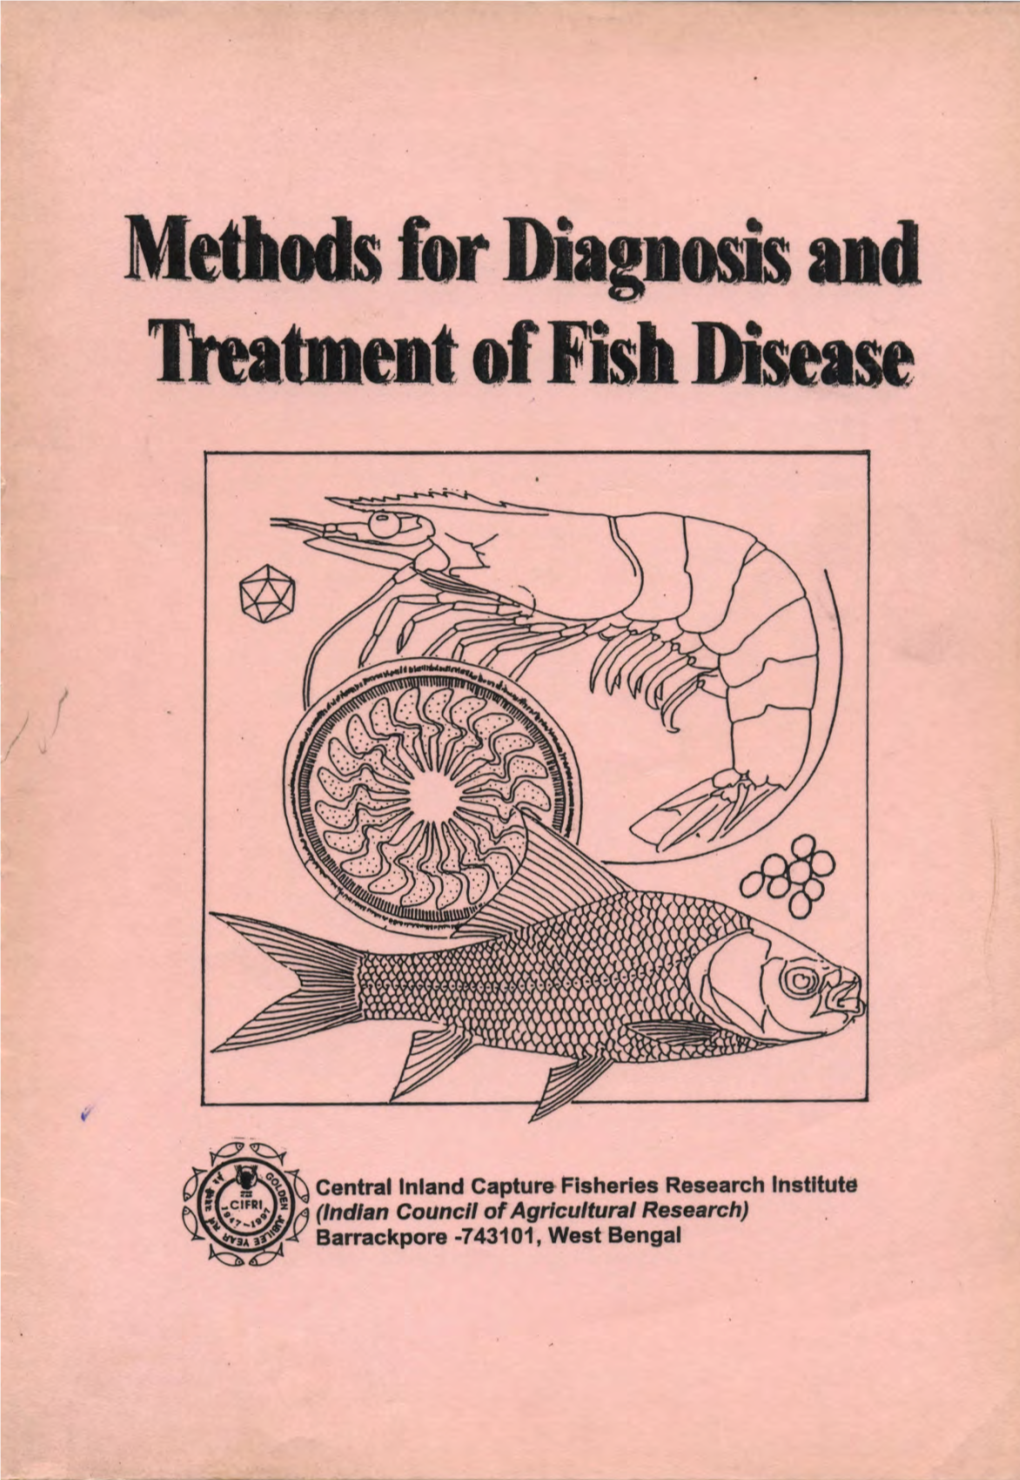 Fungal and Bacterial Diseases of Fish - Diagnosis and Therapy 16 Sanjibkr